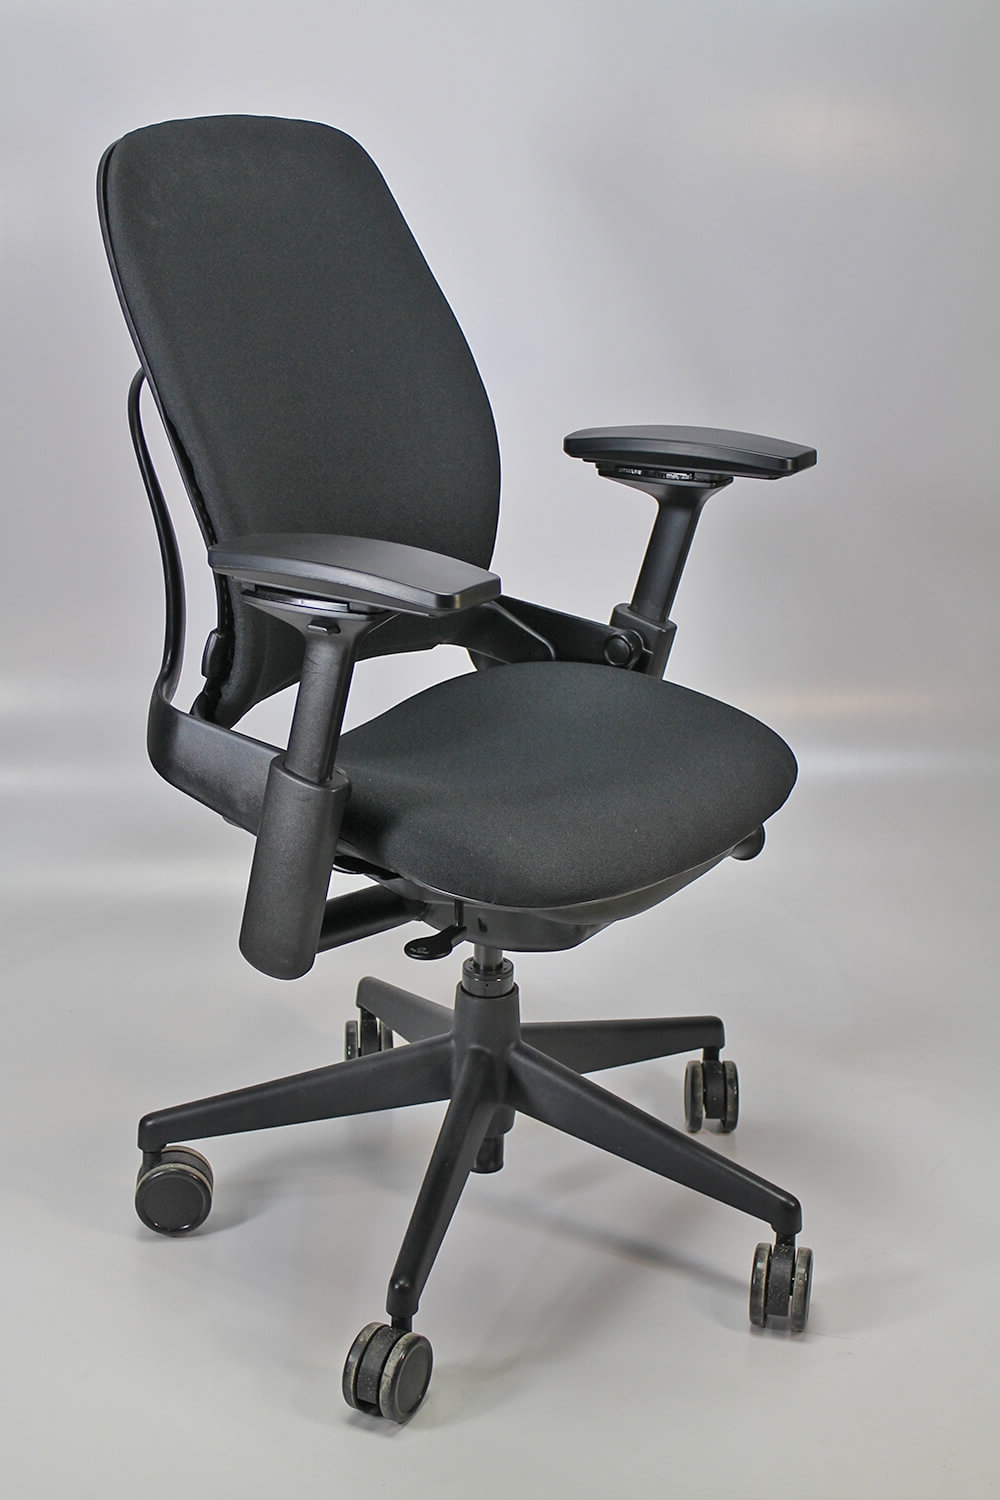 Remanufactured Steelcase Leap Chair Version 2